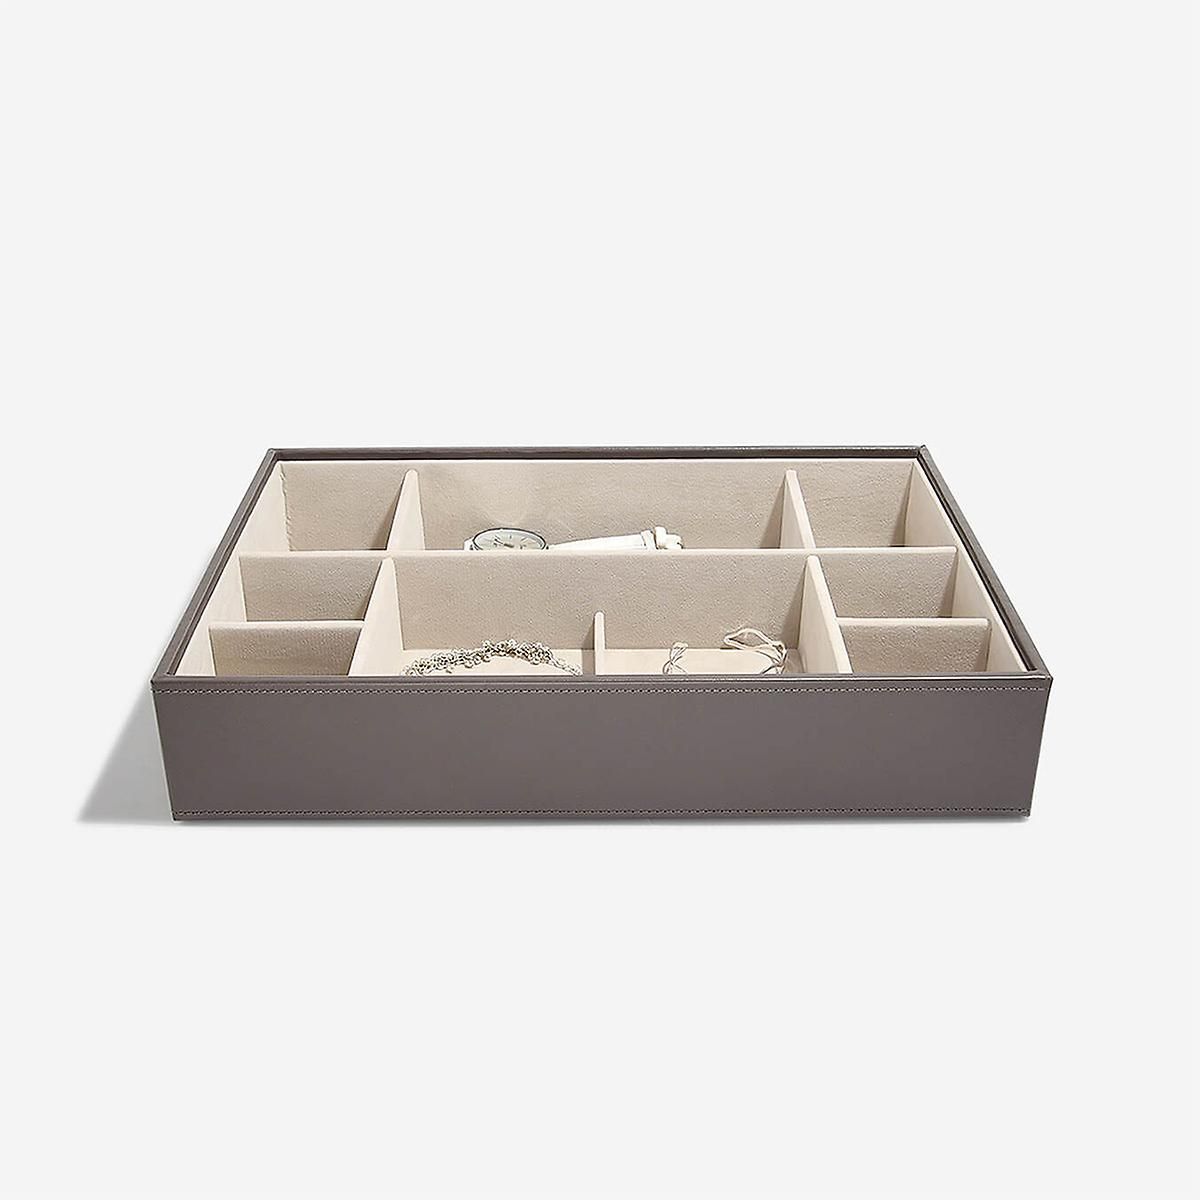 Stackers Mink Supersize Jewelry Box Collection | The Container Store